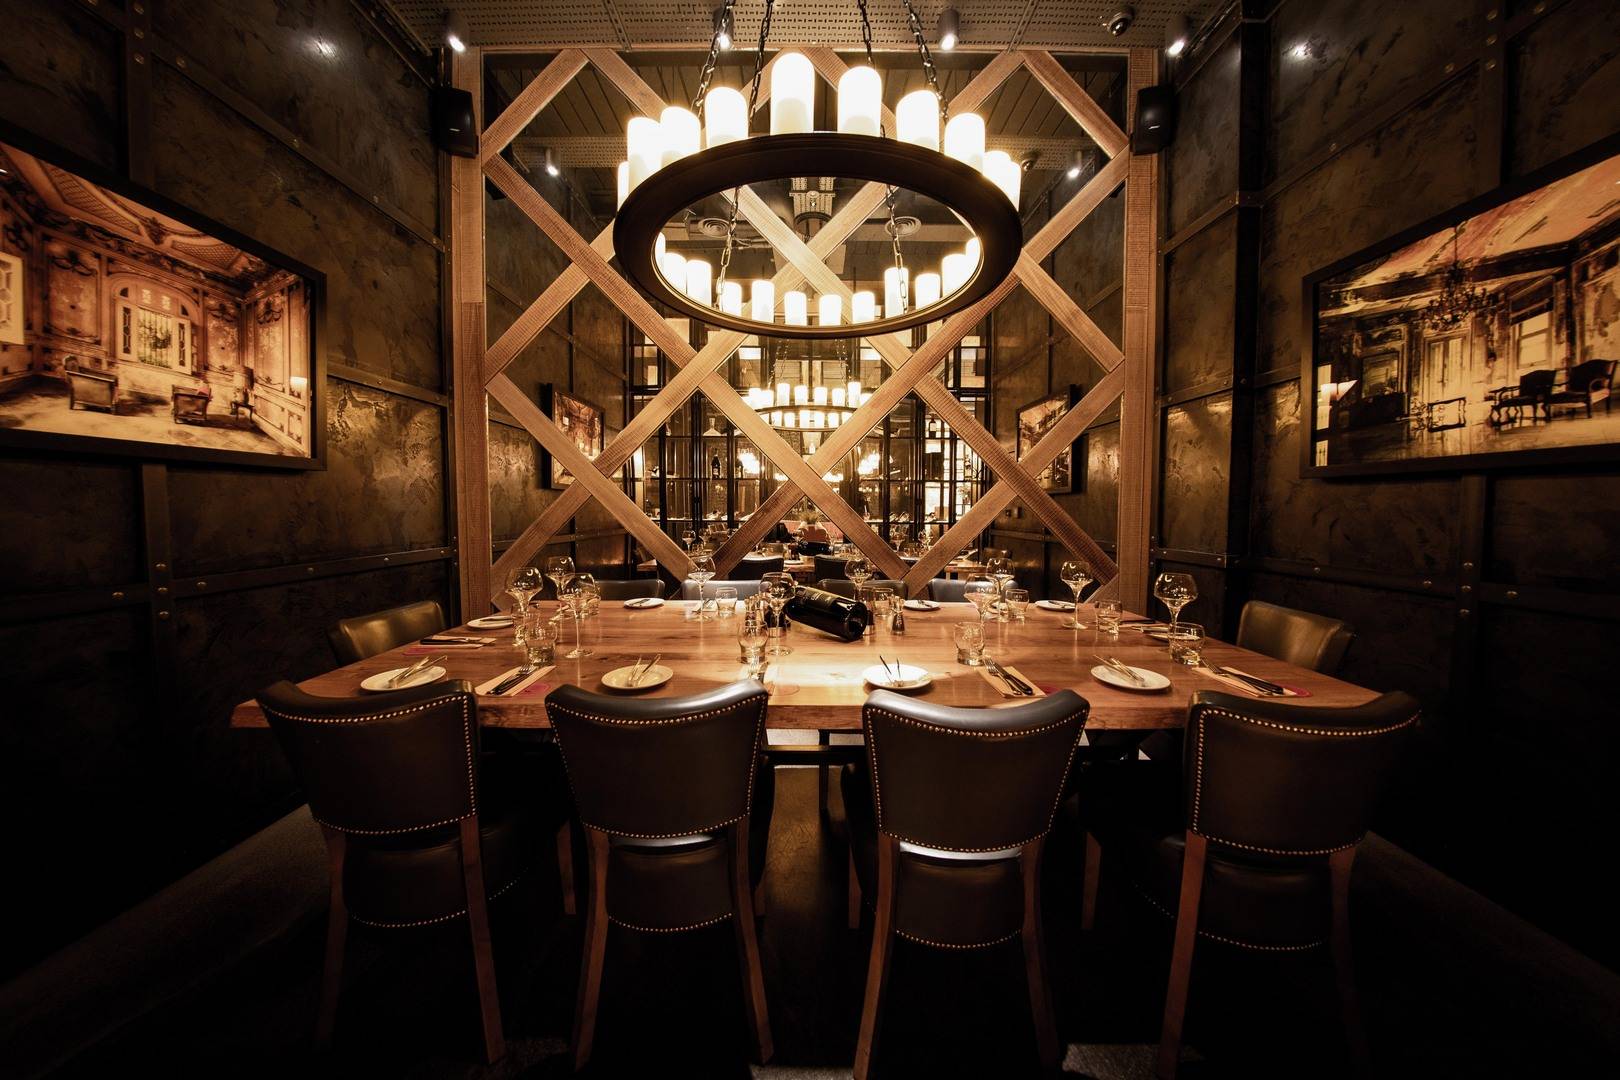 Private Dining Room - 10 person Capacity